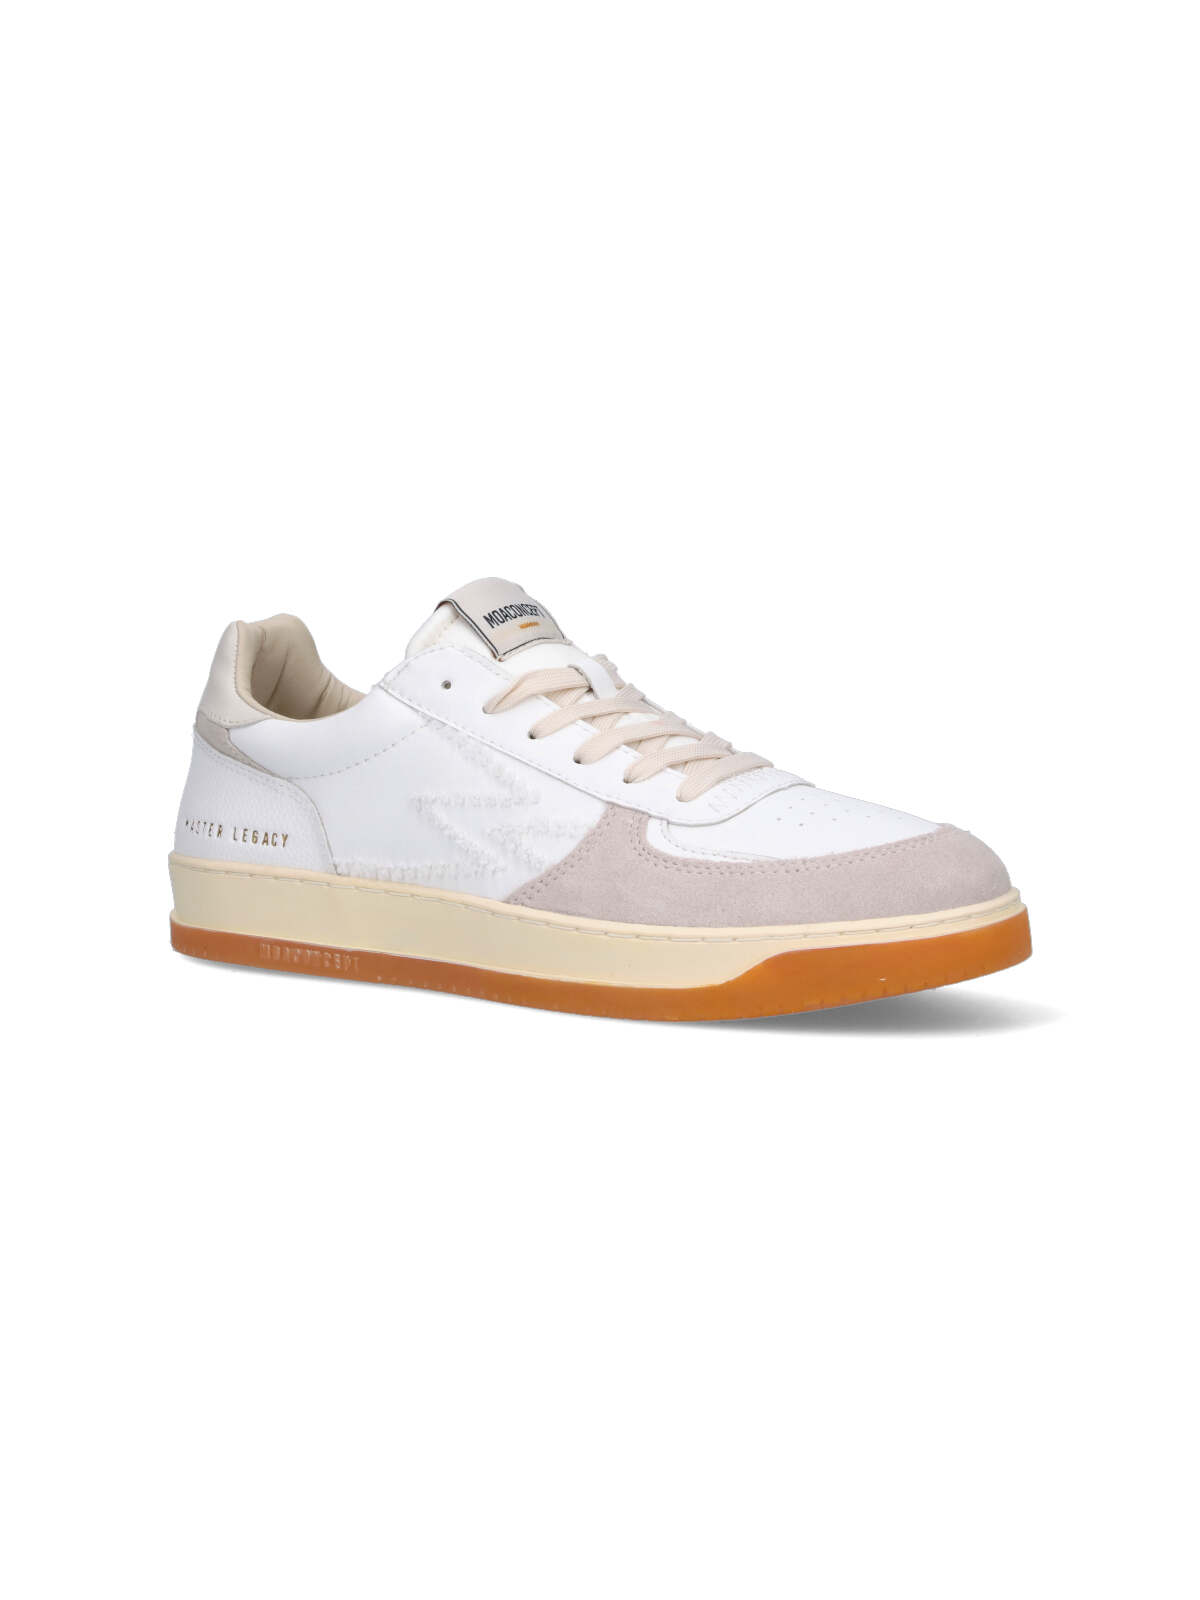 Shop Moa Master Of Arts Legacy Sneakers In White